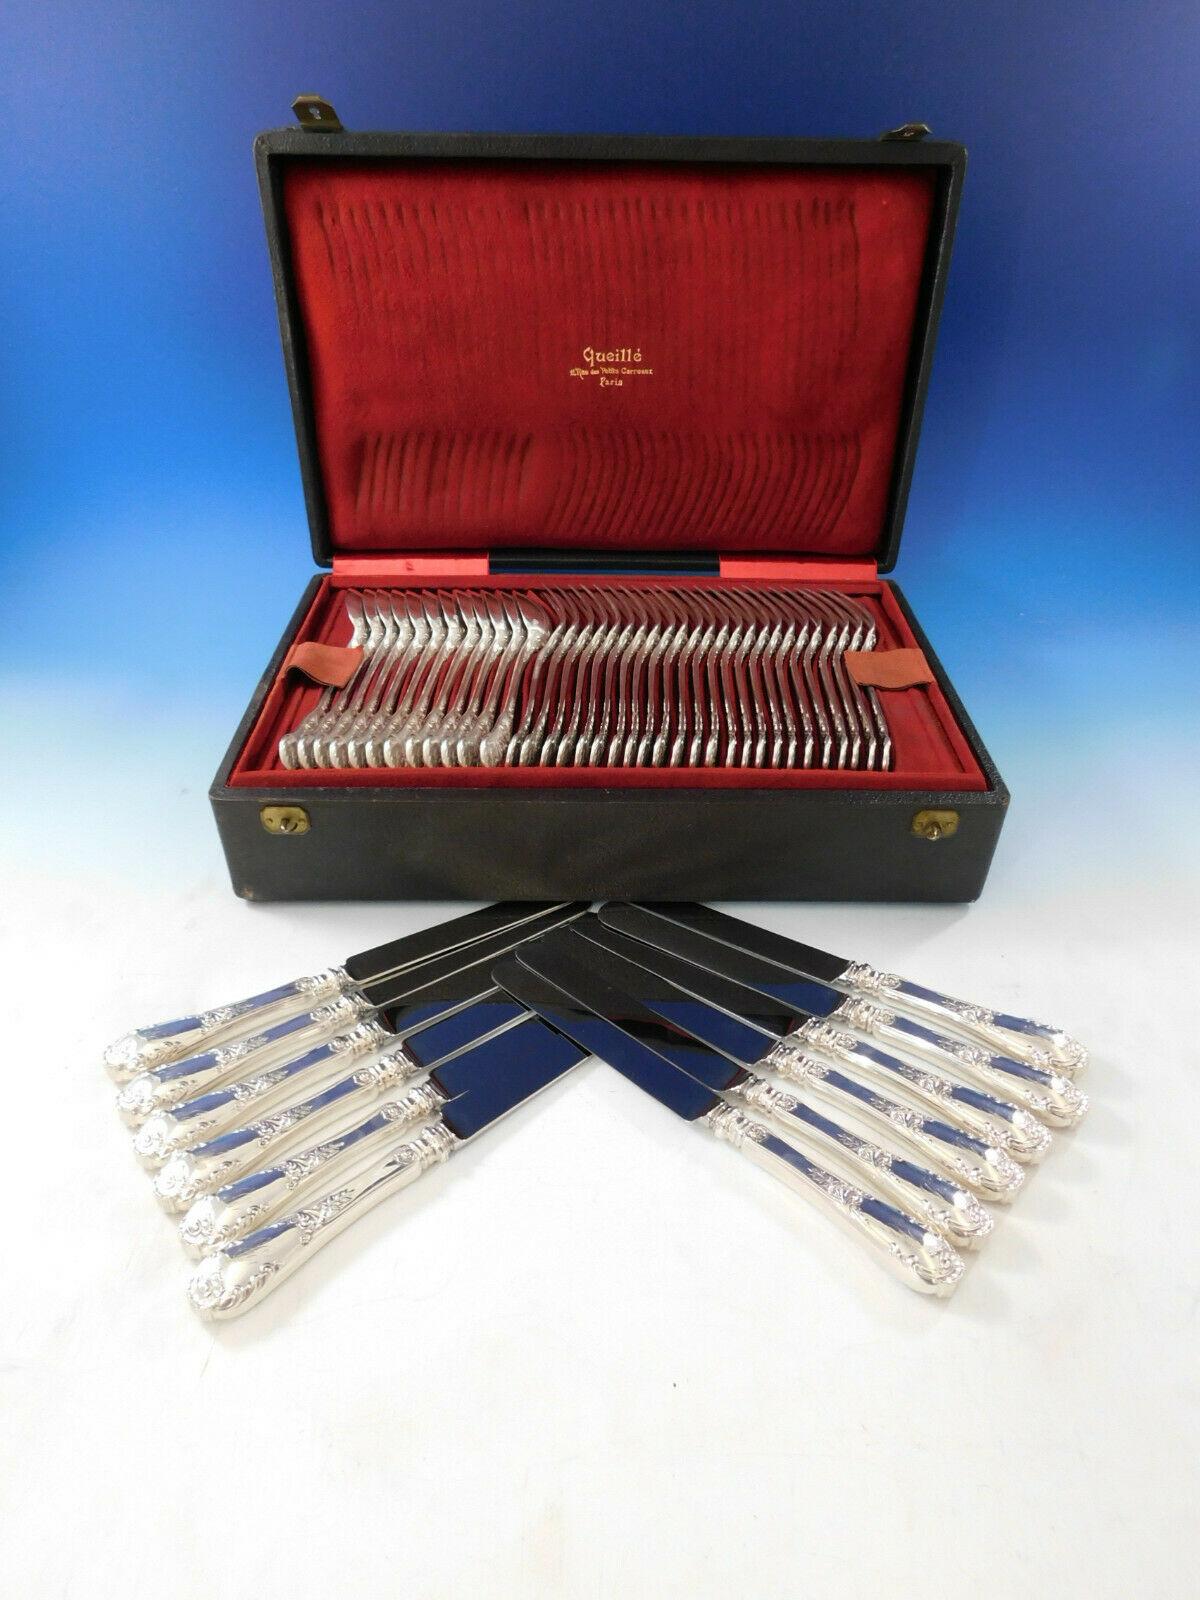 Louis XIV by Pierre Queille 950 French sterling silver dinner size Flatware set (with Louis XIV D&H dinner knives)- 78 pieces total. This set includes:

 12 Dinner Size Knives, 10 1/8